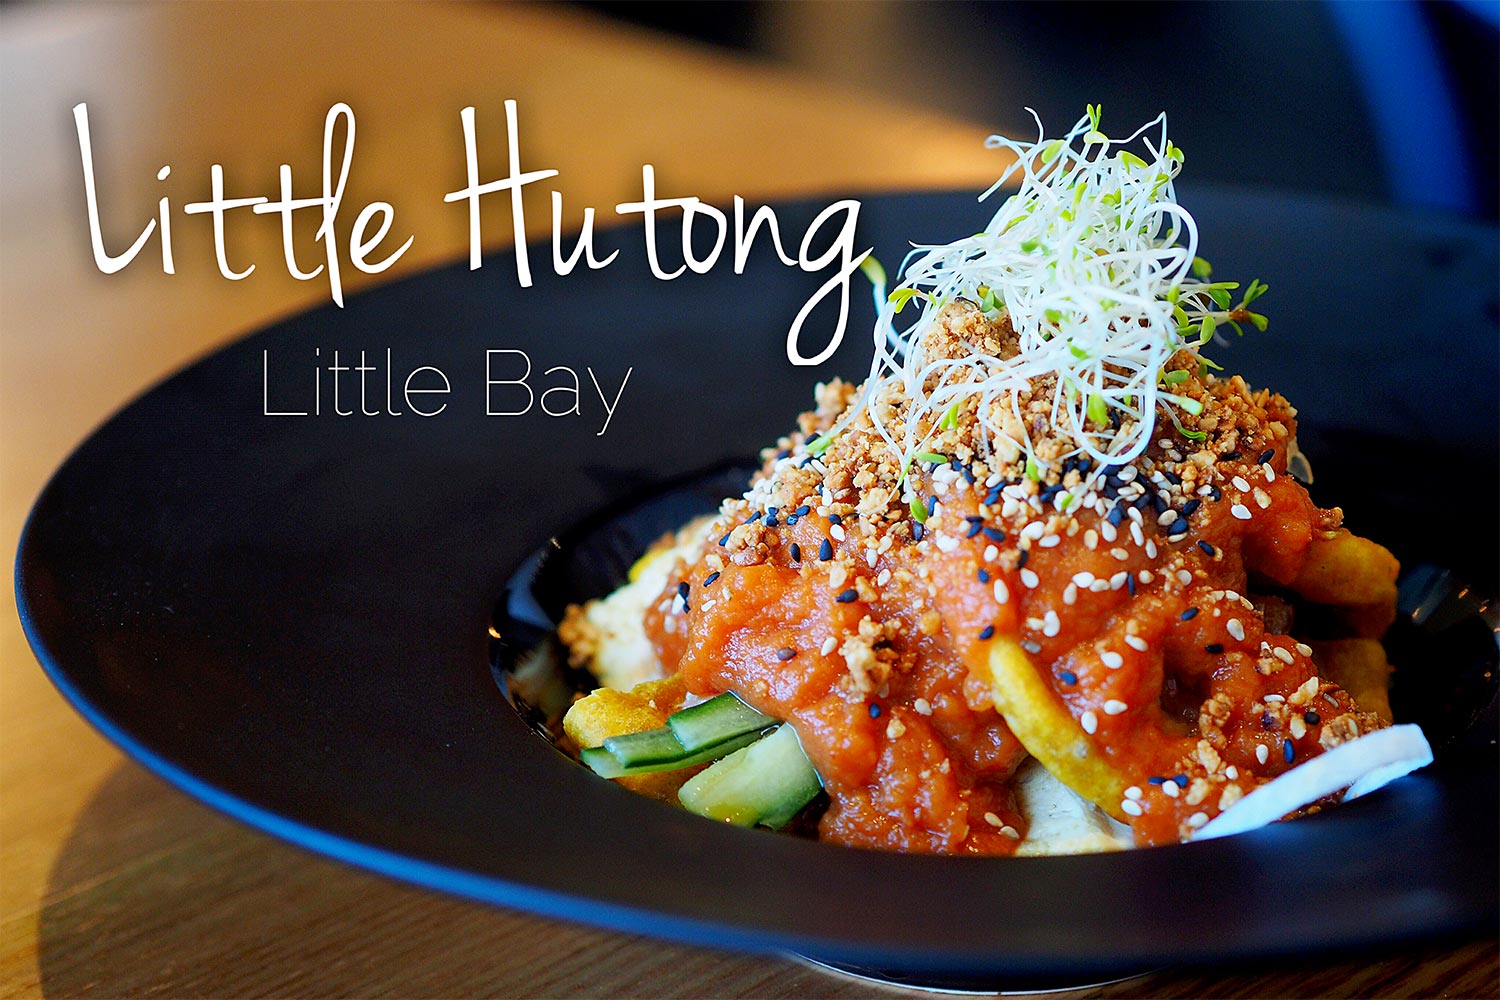 Sydney Food Blog Review of Little Hutong, Little Bay